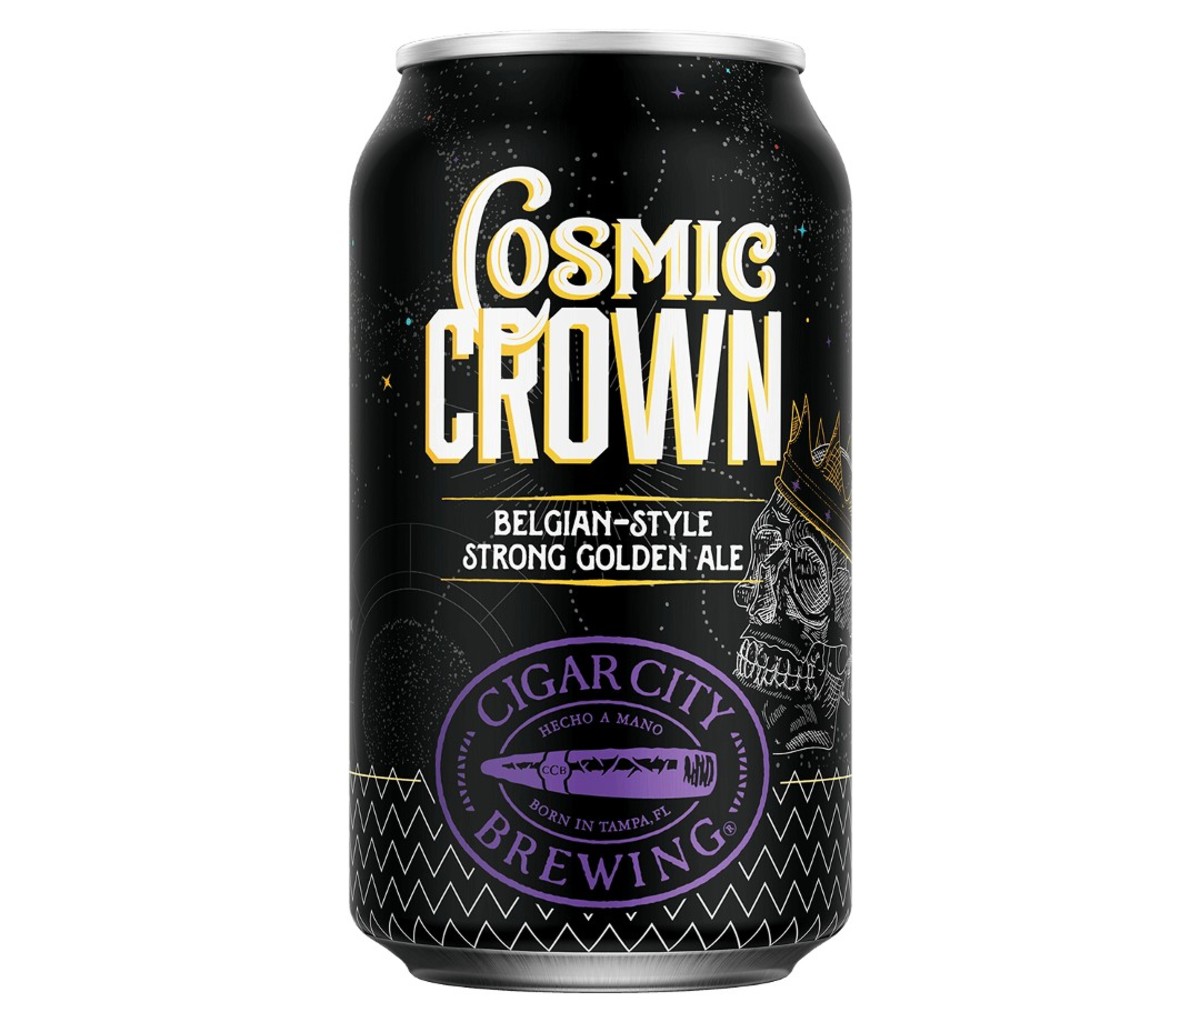 A can of Cigar City Cosmic Crown